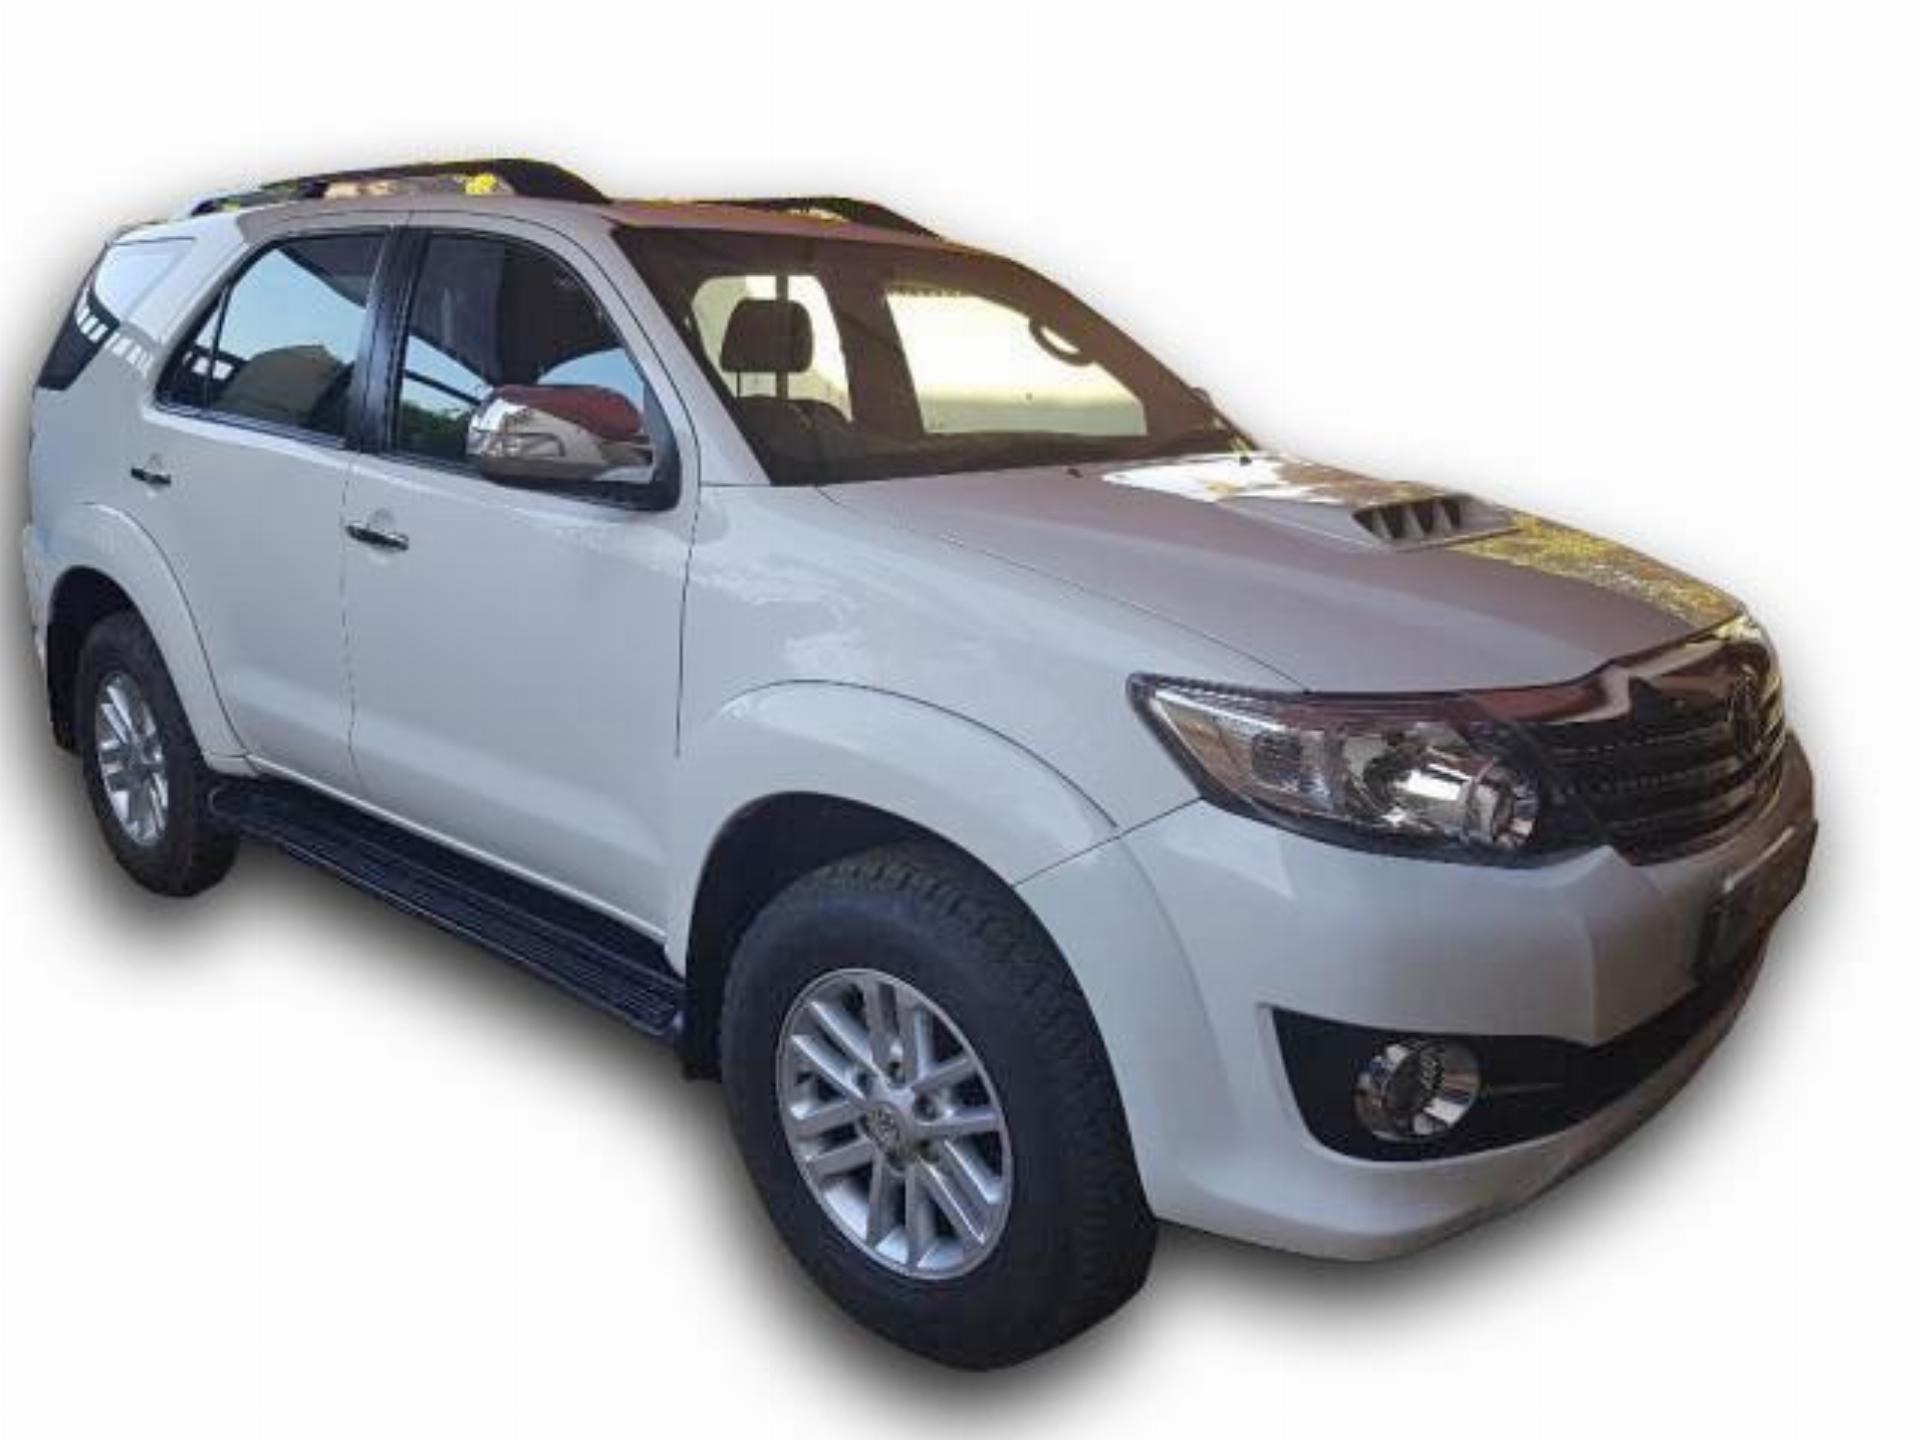 Toyota Fortuner 2.5 D-4D A/T